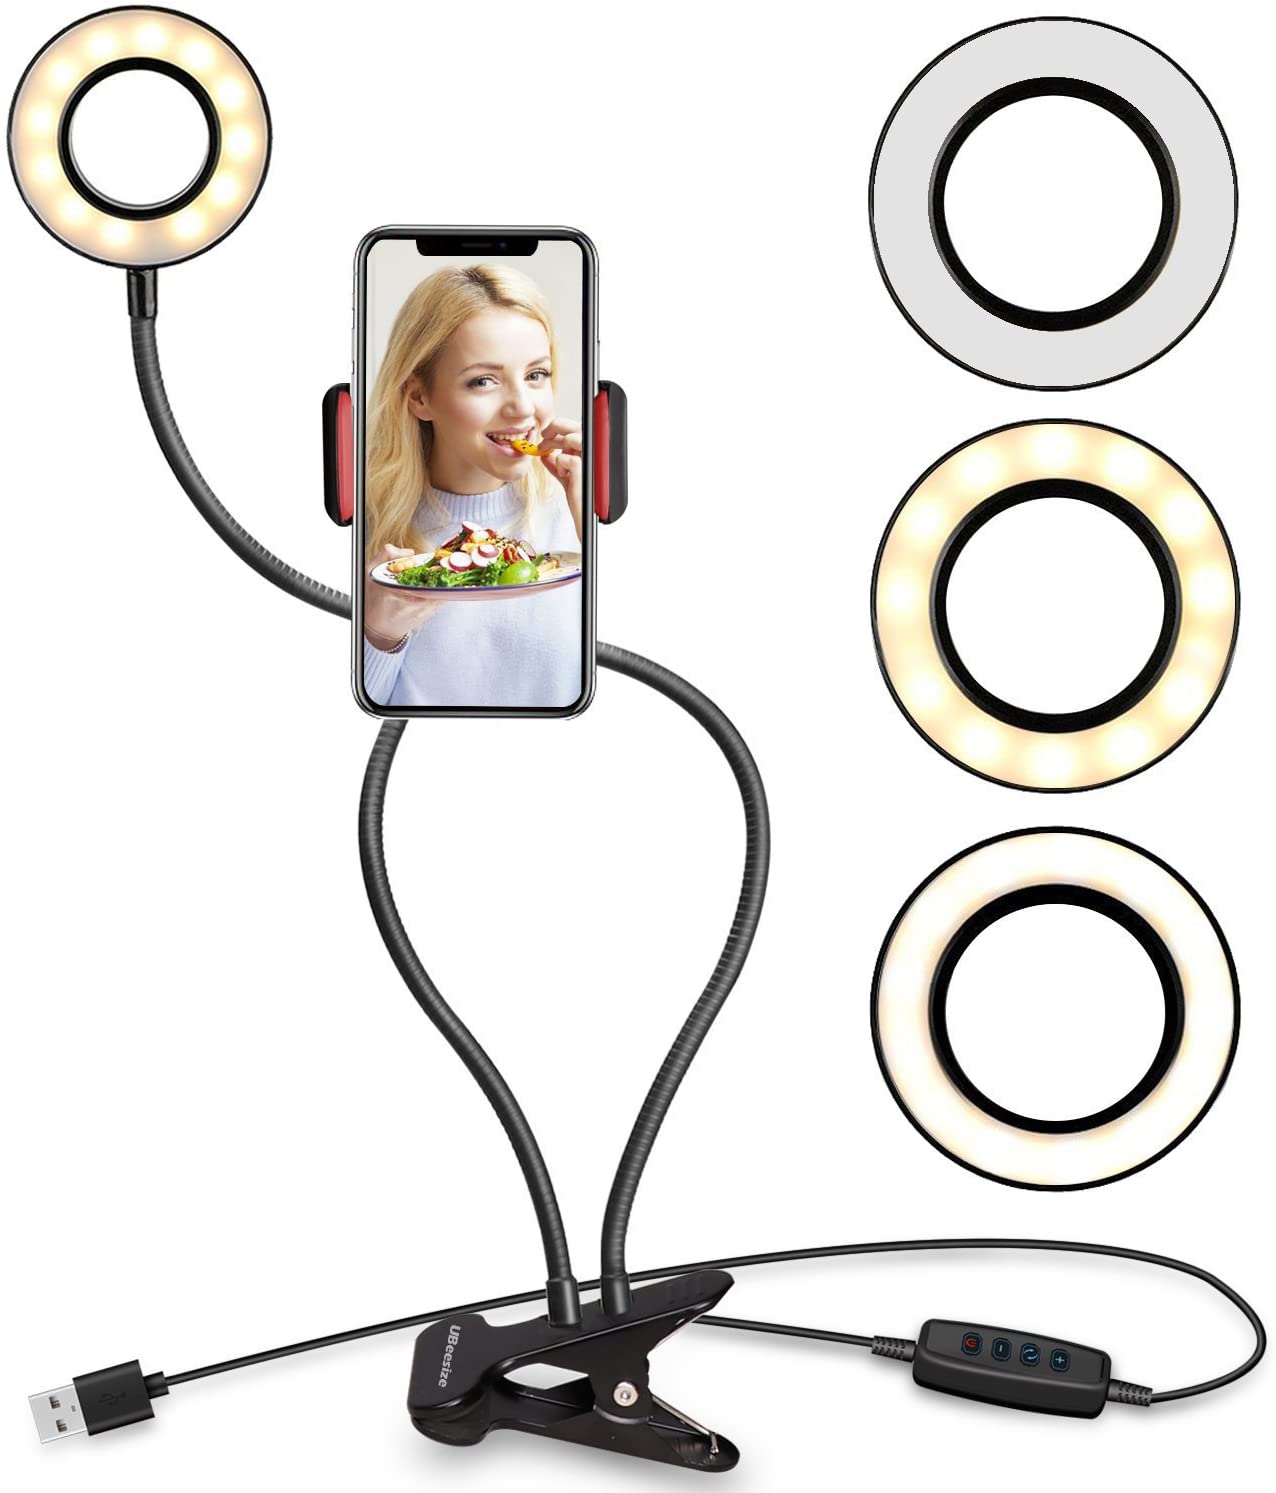 UBeesize Selfie Ring Light With Clip On Flexible Arms